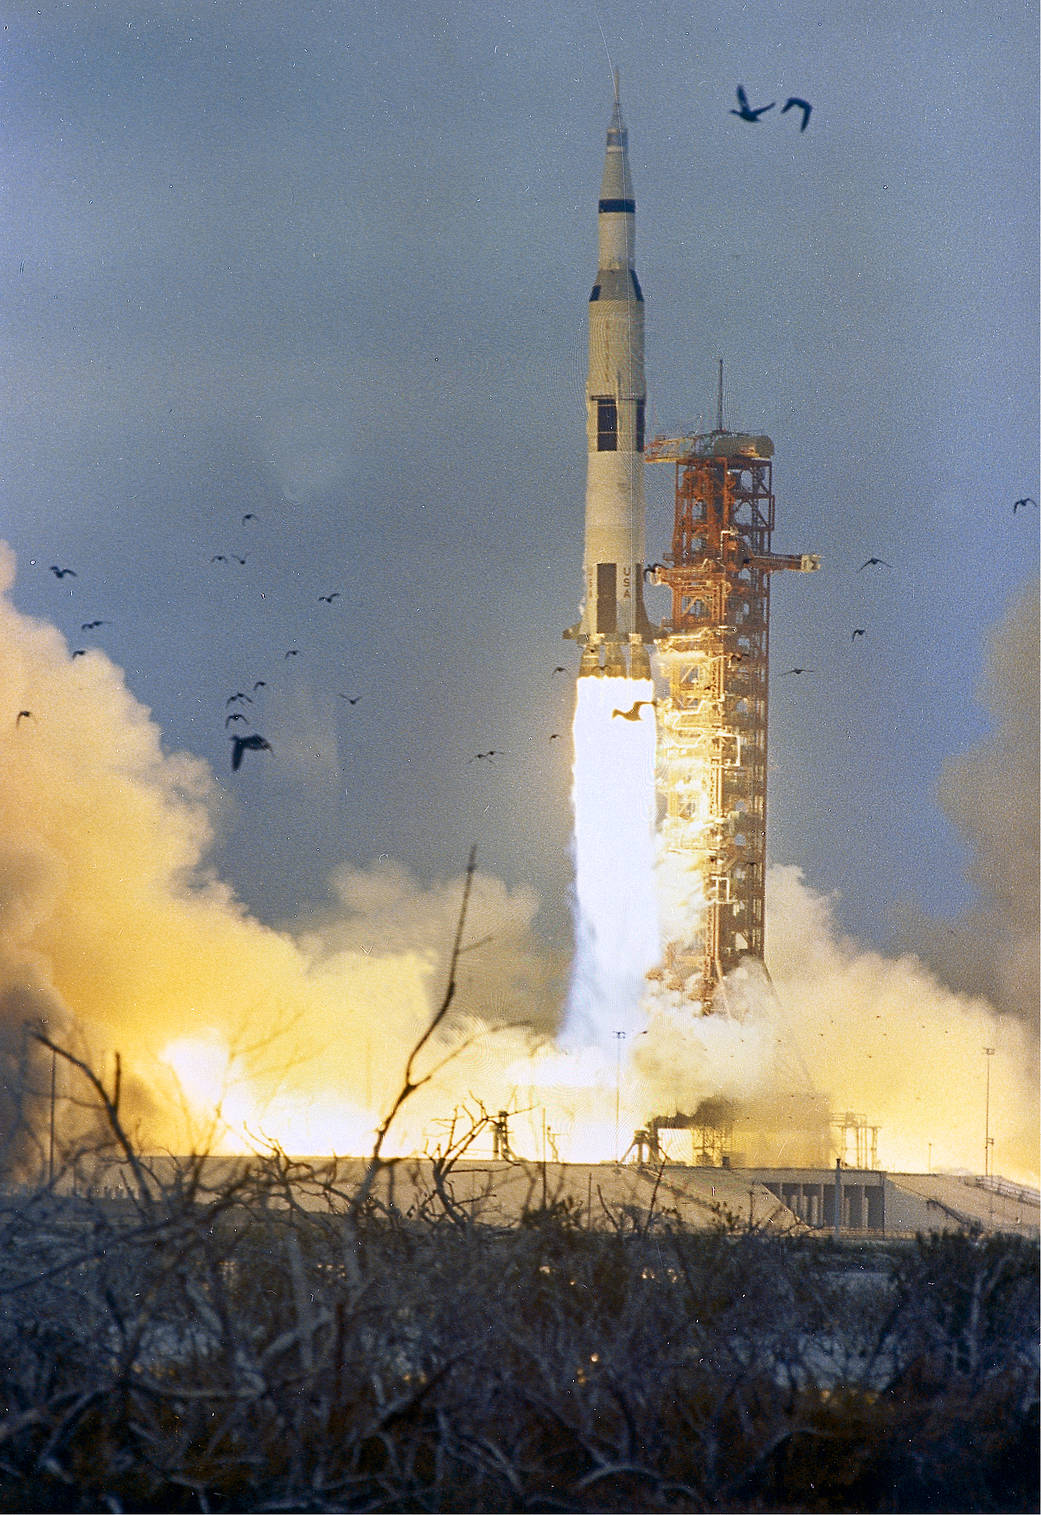 This week in 1969, Apollo 9 lifted off from Launch Complex 39B at NASA’s Kennedy Space Center. 